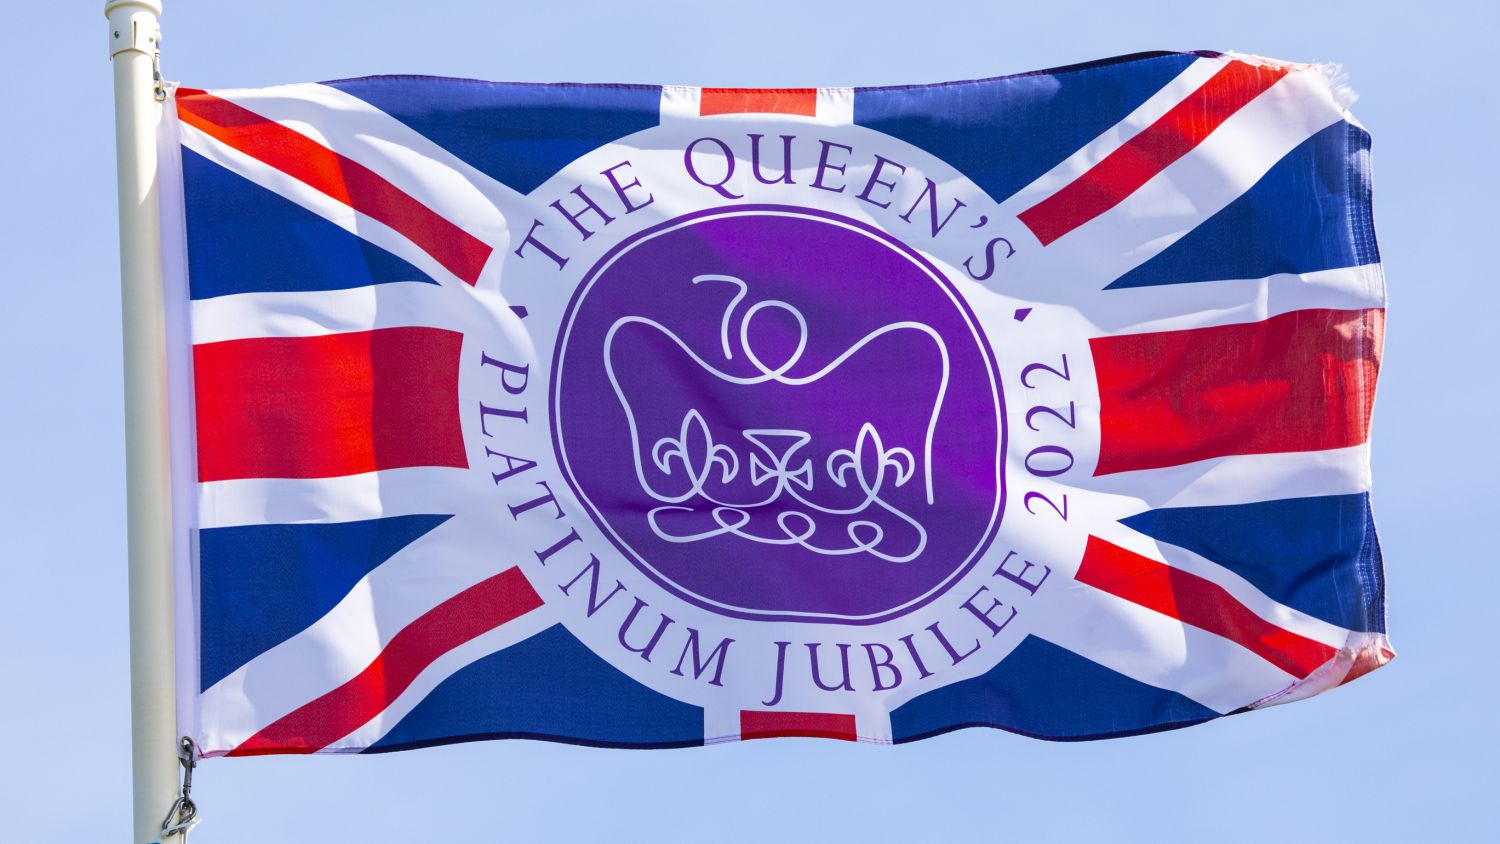 Several construction figures were recognised in the Queen's Jubilee Honours (Image: Dreamstime)